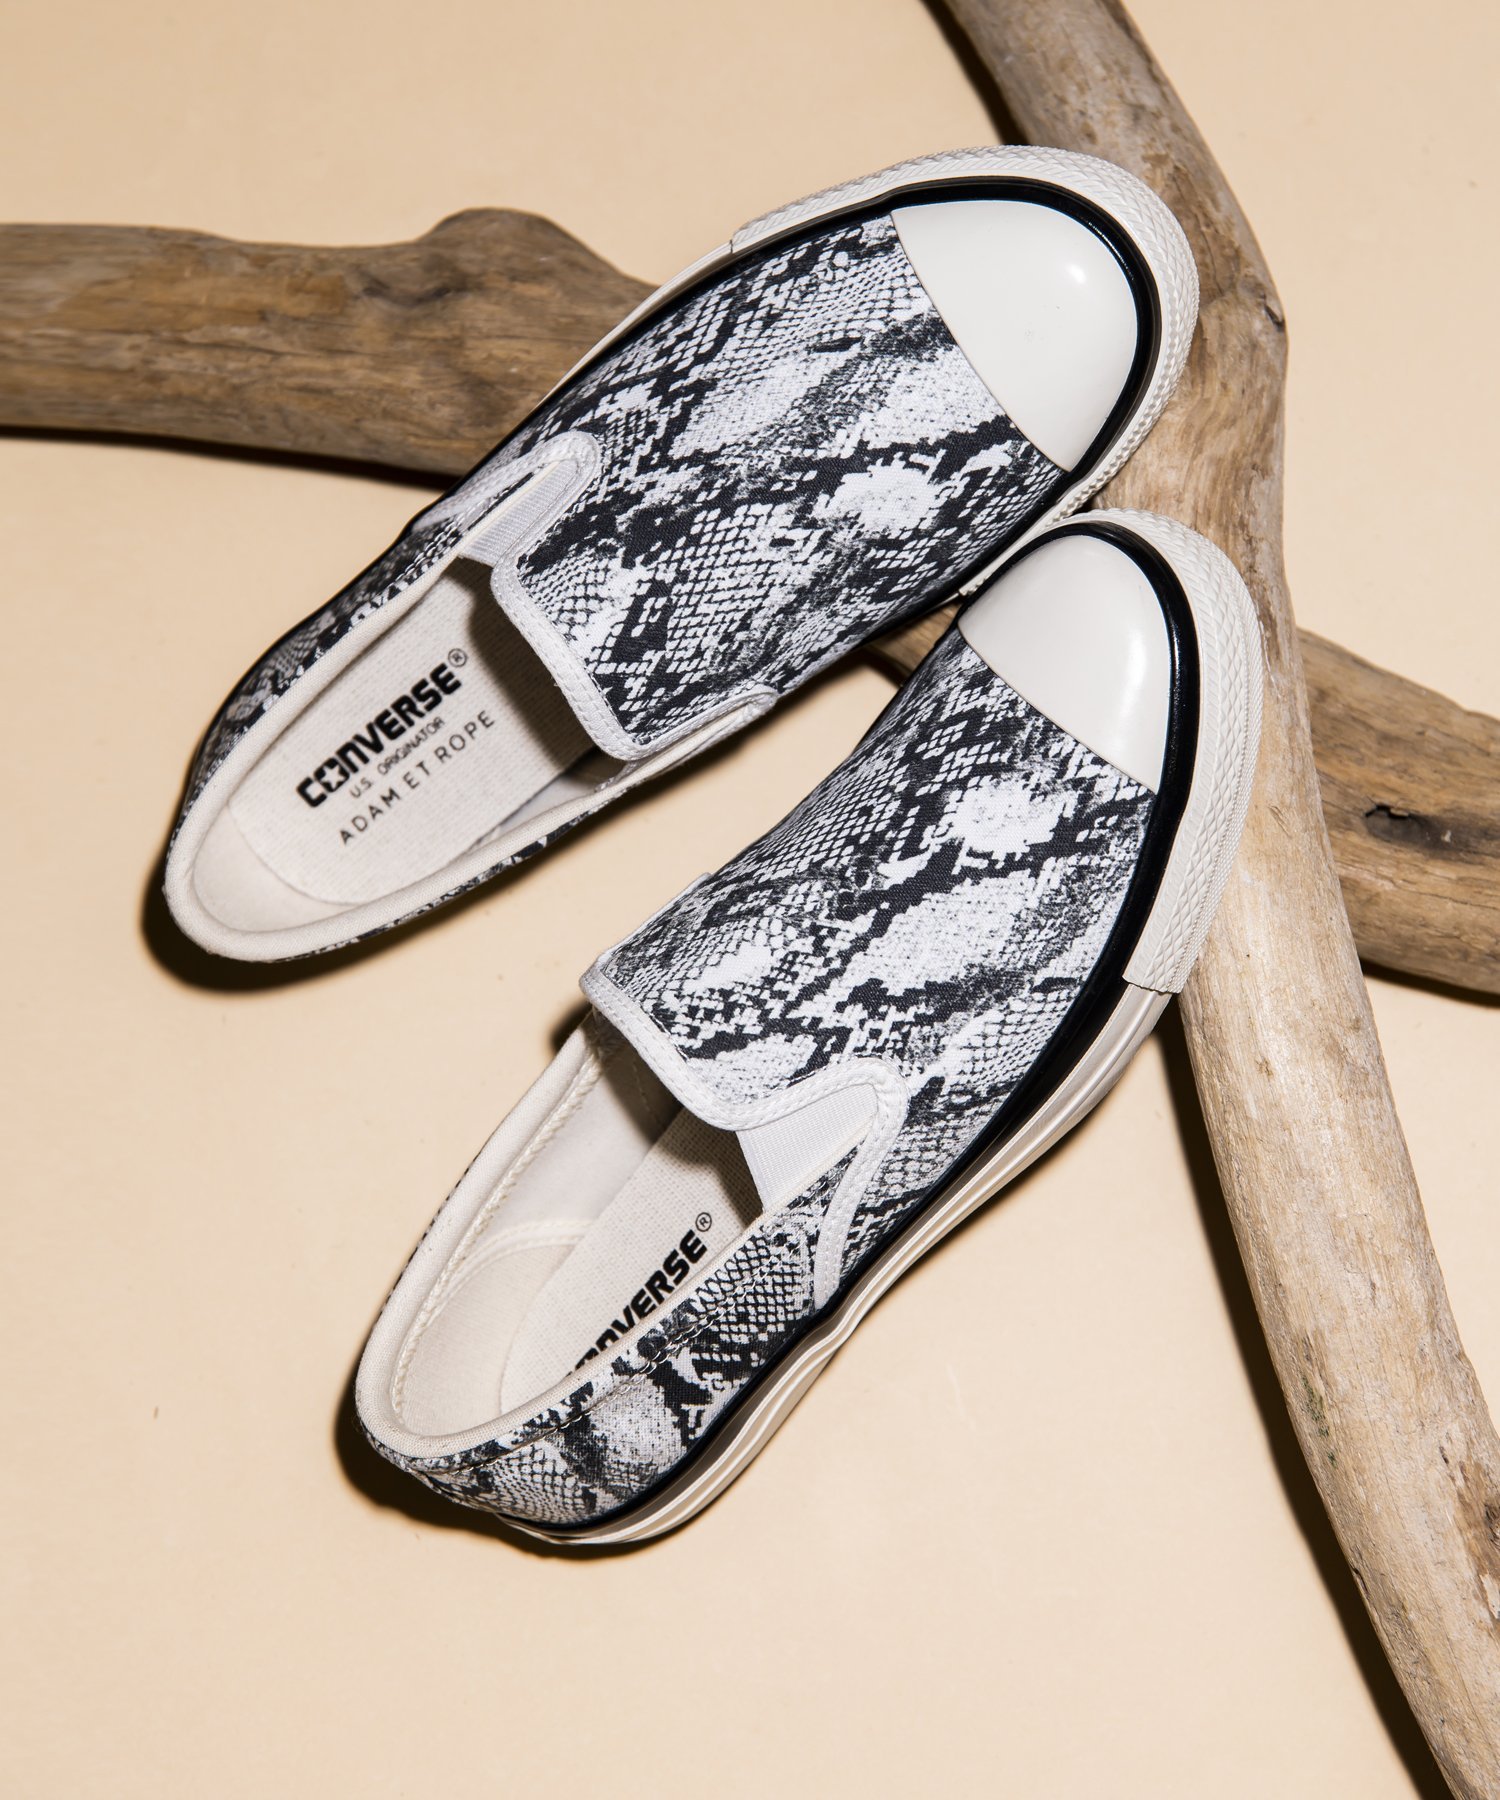 【SALE／40 OFF】ADAM ET ROPE 039 HOMME 【CONVERSE for ADAM ET ROPE 039 】EXCLUSIVE Python ALL STAR US SLIP-ON アダムエロペ シューズ 靴 スリッポン グレー【送料無料】